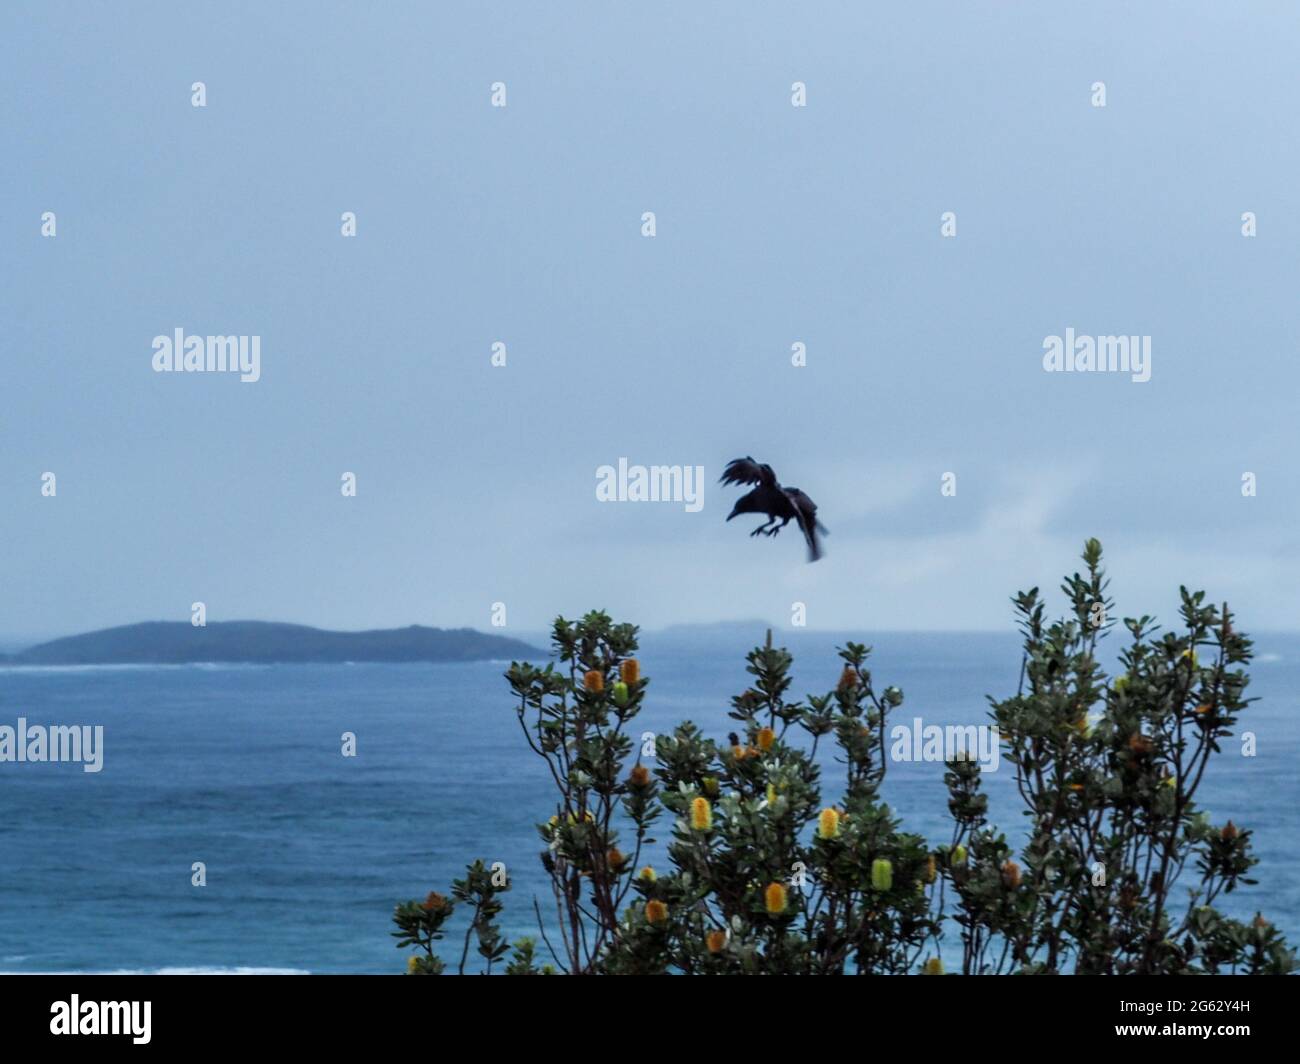 Bird, Making a landing, an Australian Raven or crow, silhouetted against a grey blue sky and sea as it flys in to land on a Coastal Banksia bush, Stock Photo